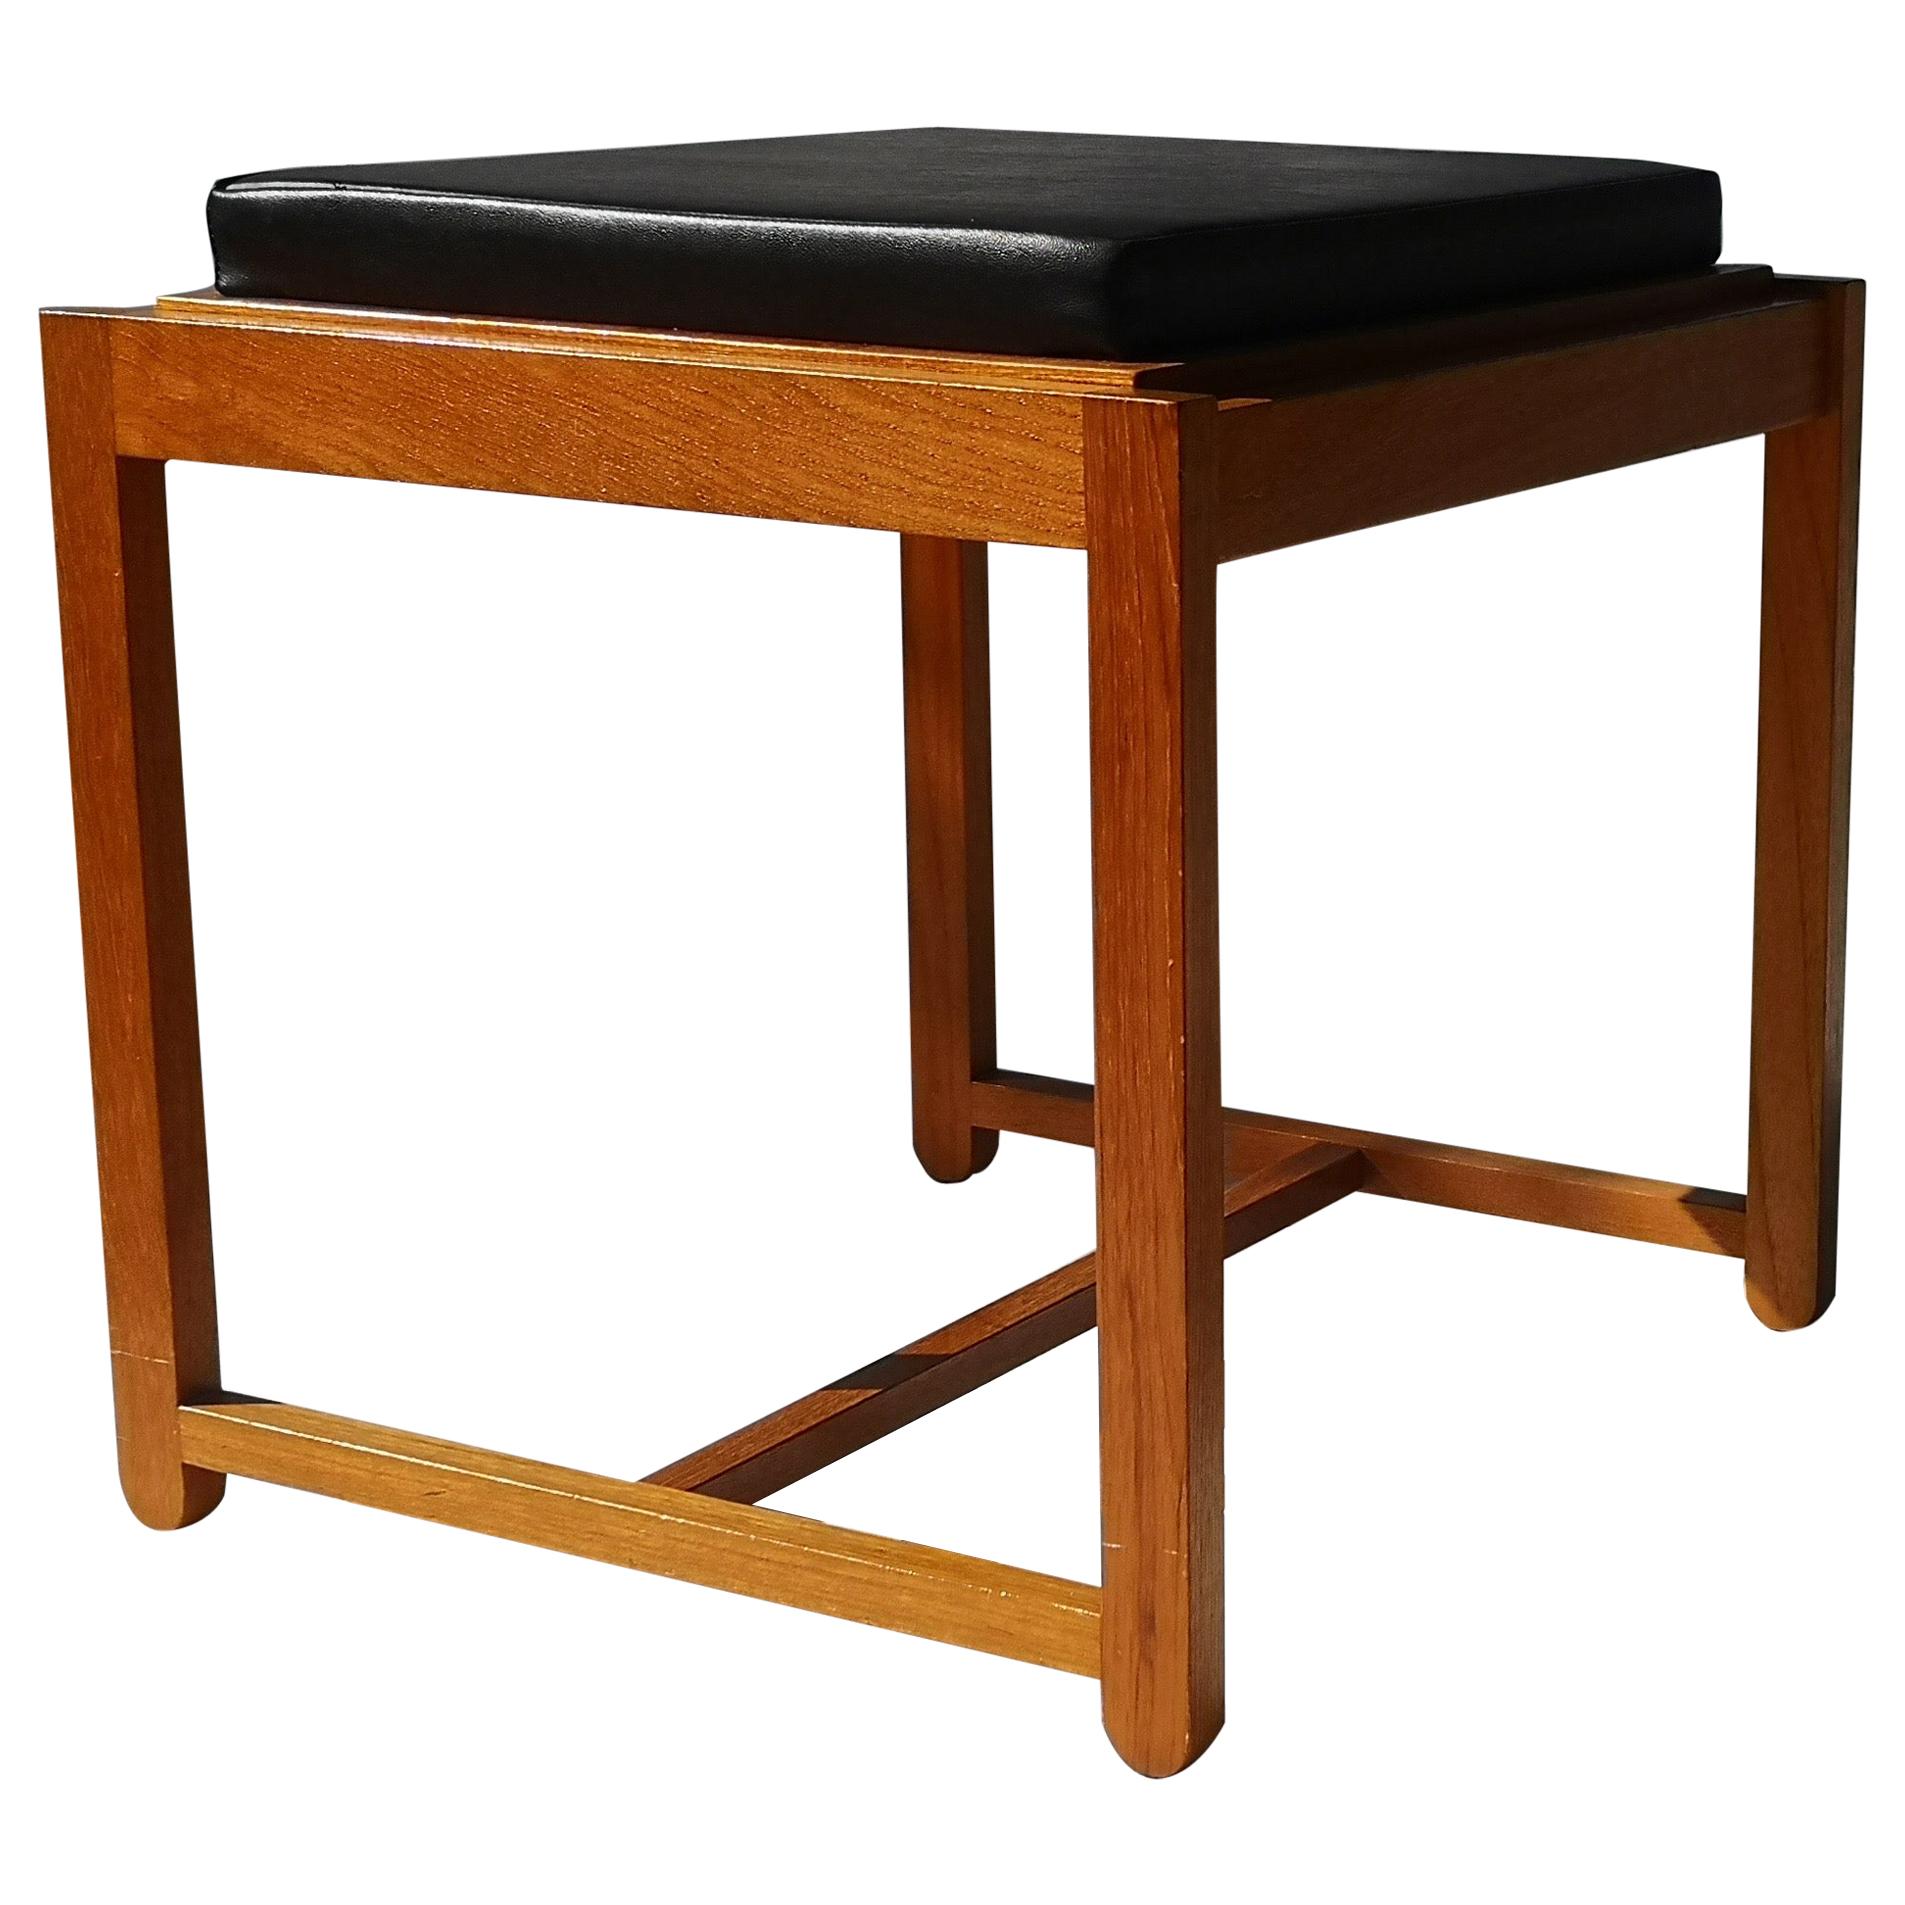 1960s Danish Modern Convertible Teak Side / End Table / Ottoman / Stool by  For Sale